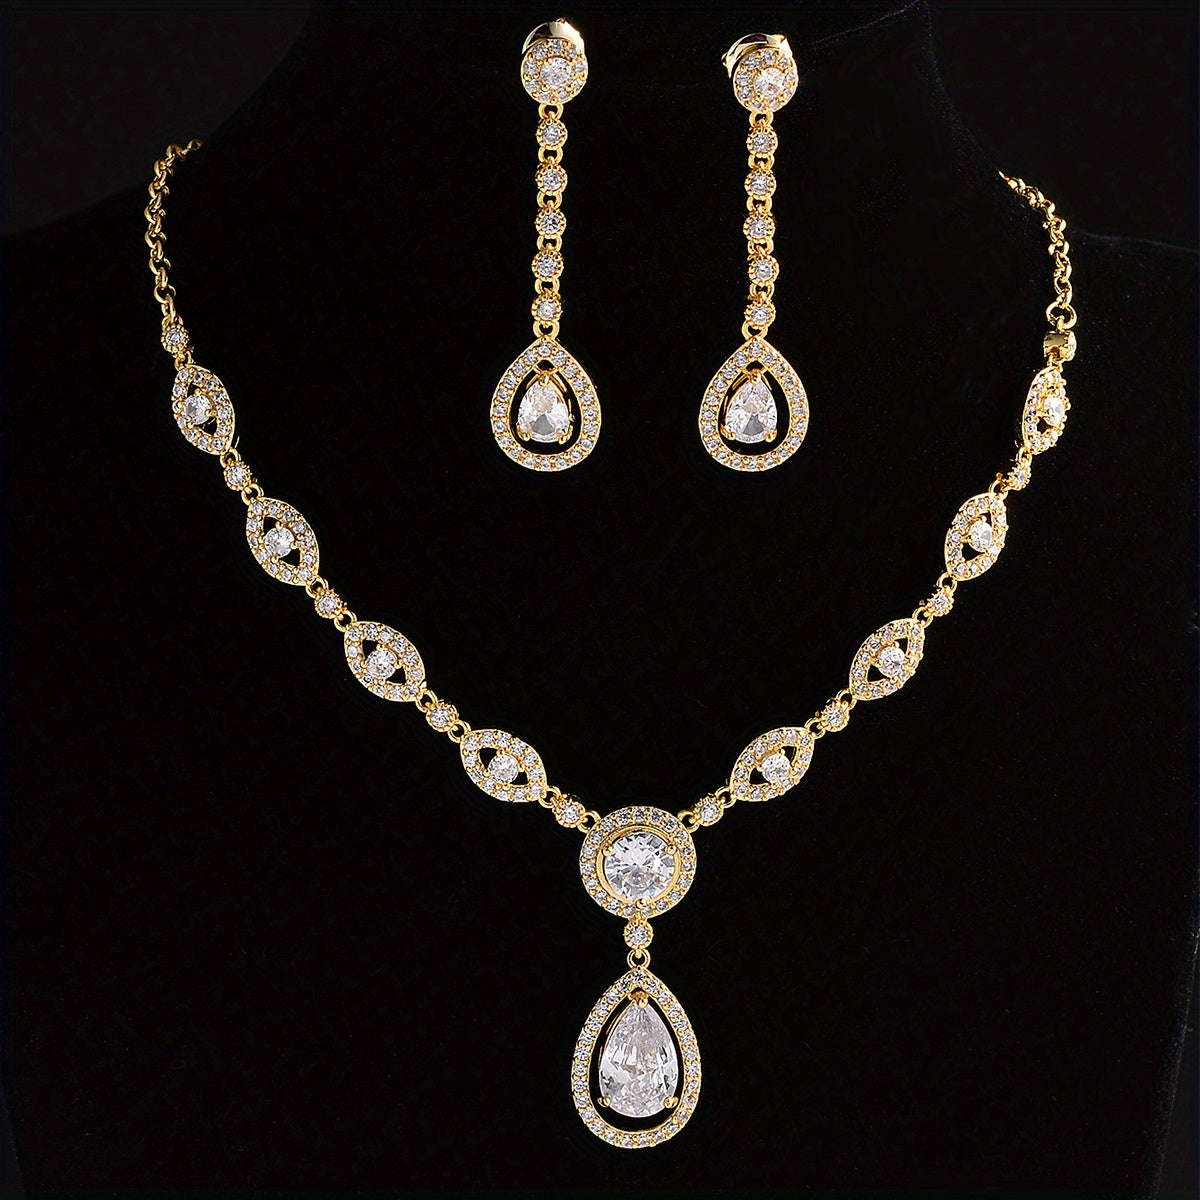 Elegant Water Drop Zircon Jewelry Set - 18K Gold Plated Earrings and Necklace for Women and Girls